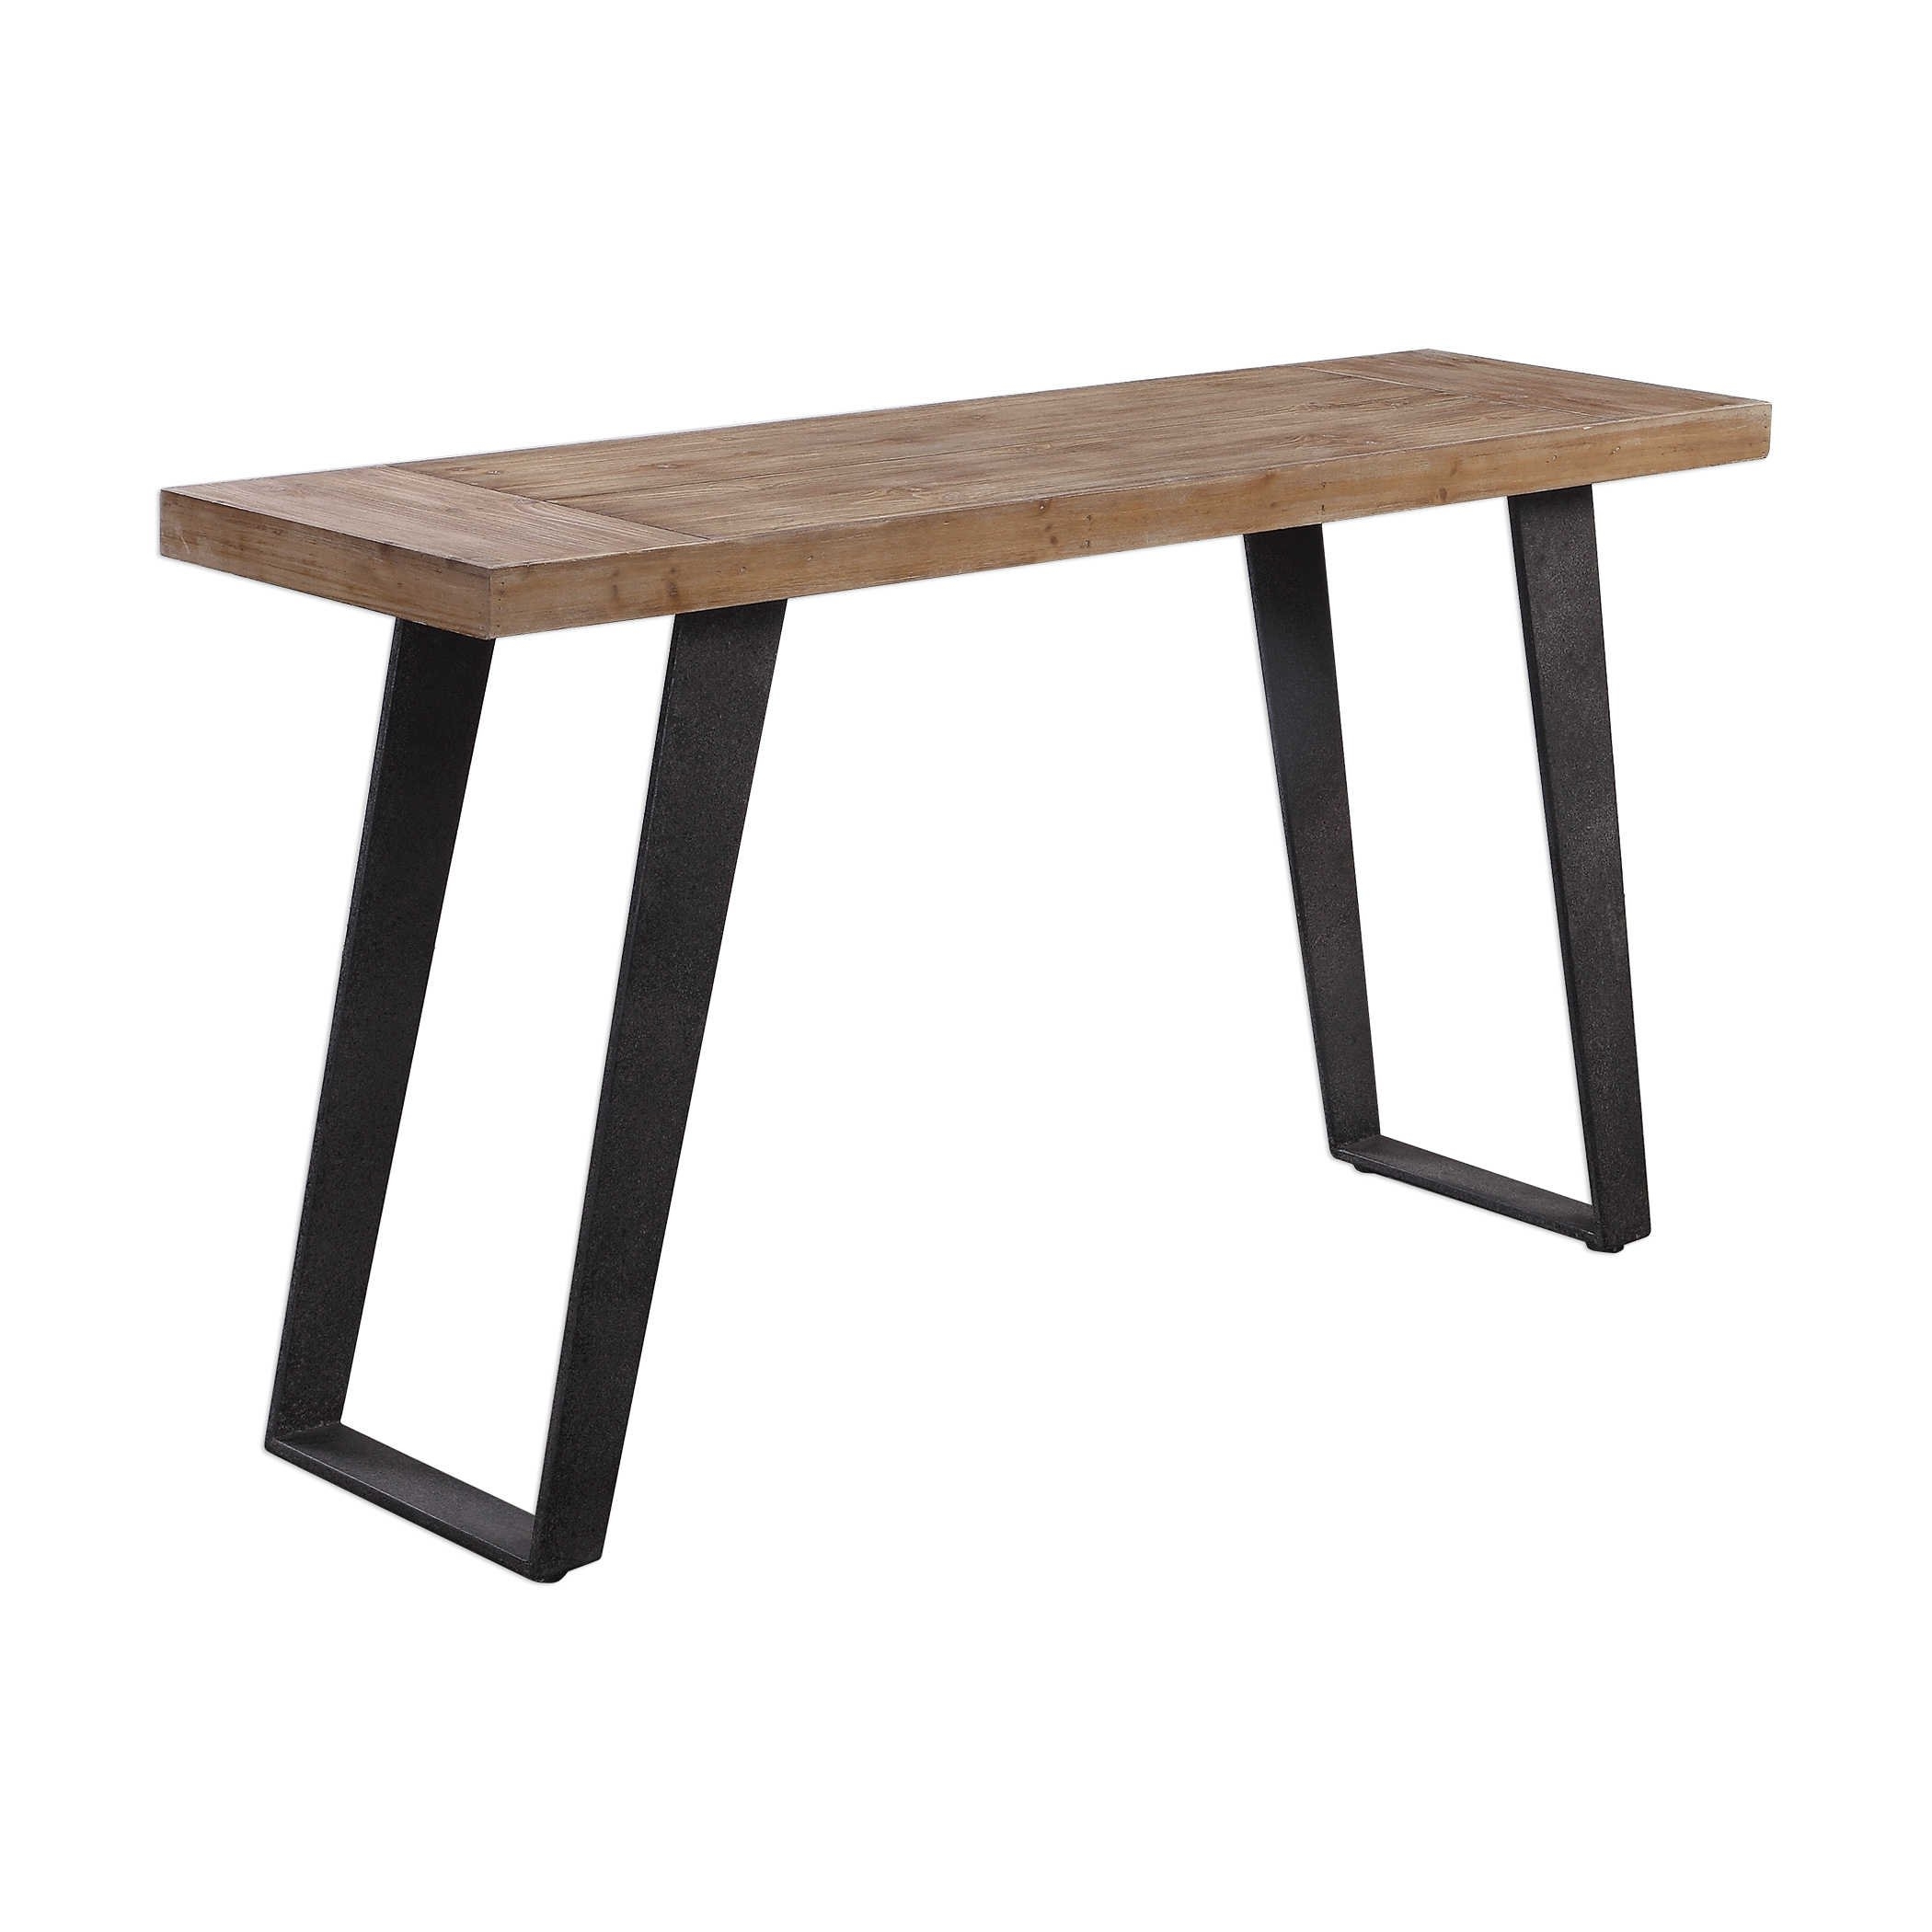 Freddy Console Table - Image 1